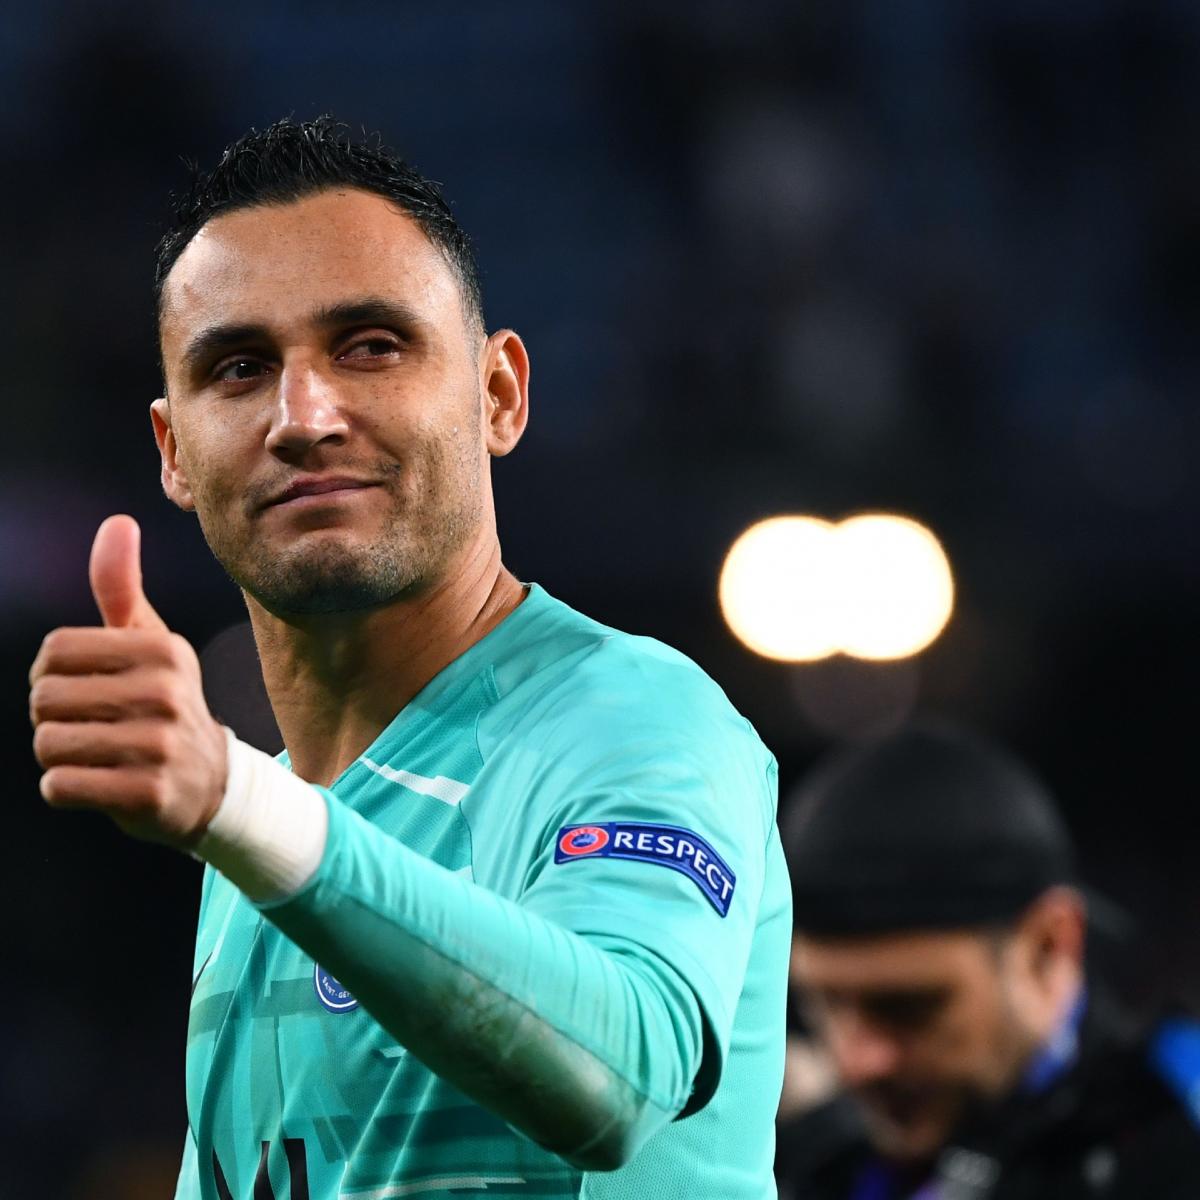 PSG's Keylor Navas Says He Does Not Know Why He Had to Leave Real ...